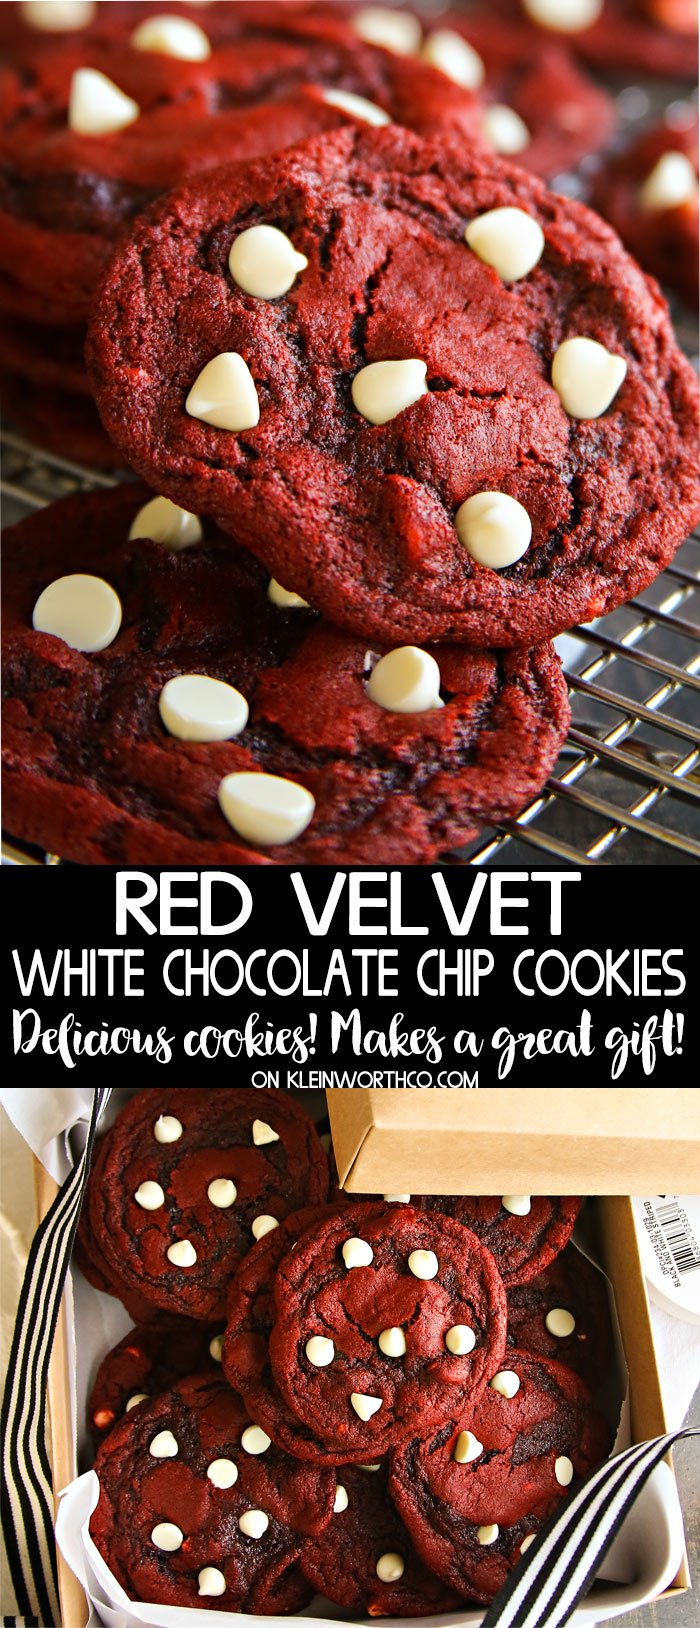 Red Velvet White Chocolate Chip Cookies for the holidays